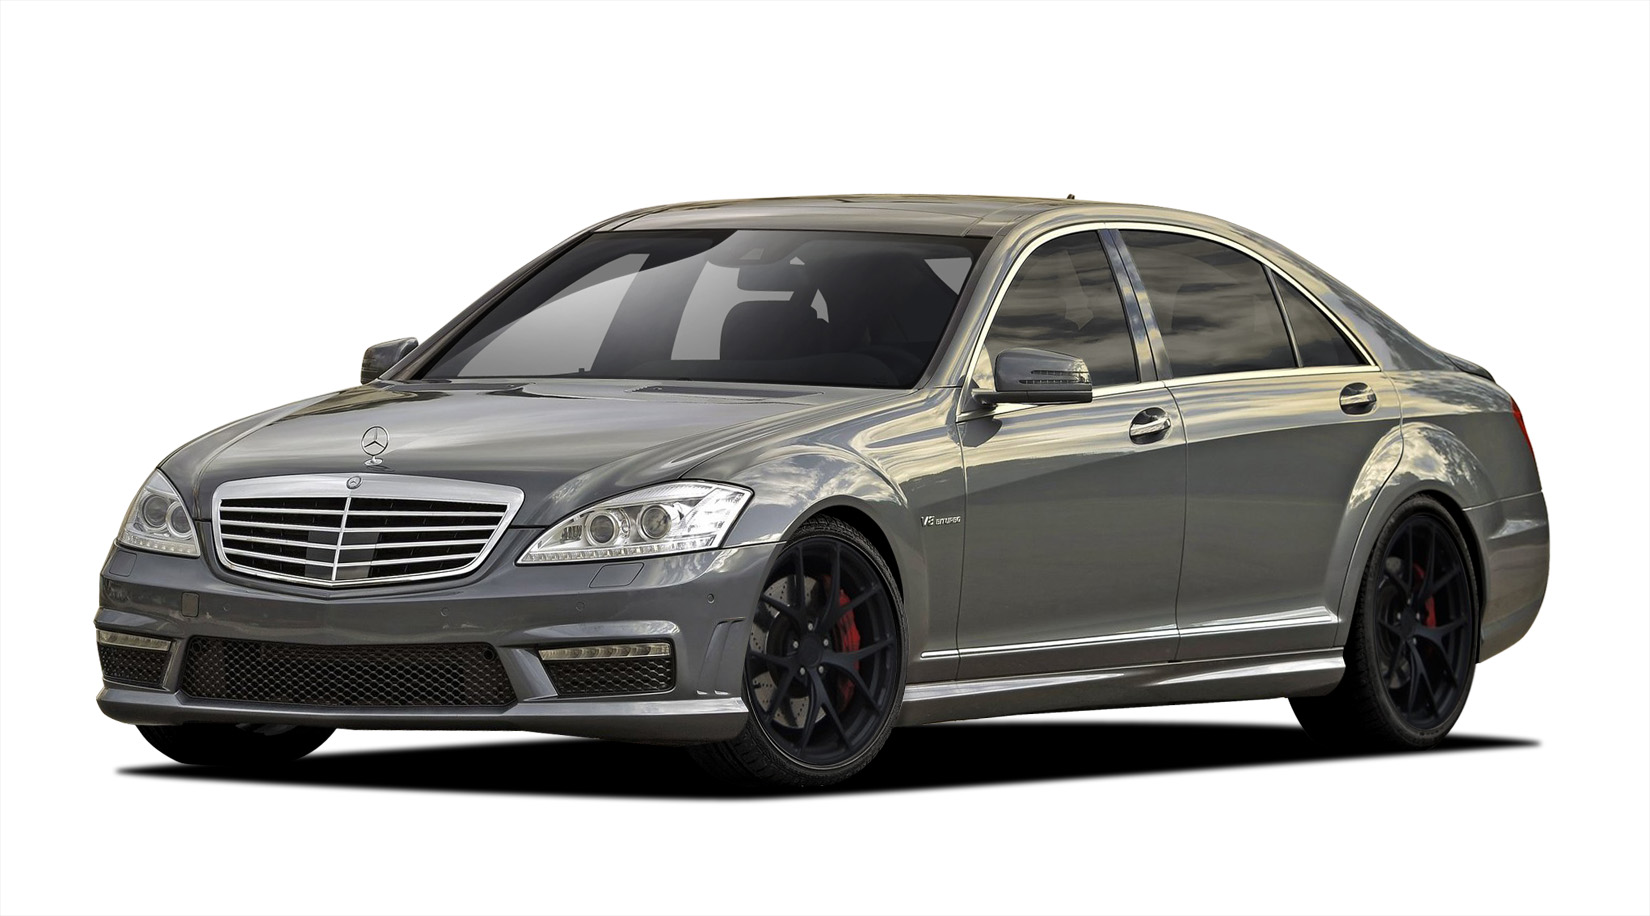 Polypropylene Body Kit Bodykit for 2012 Mercedes S Class ALL - Mercedes S Class W221 Vaero S63 Look Kit ( with PDC ) - 4 Piece - Includes S63 Look Fro